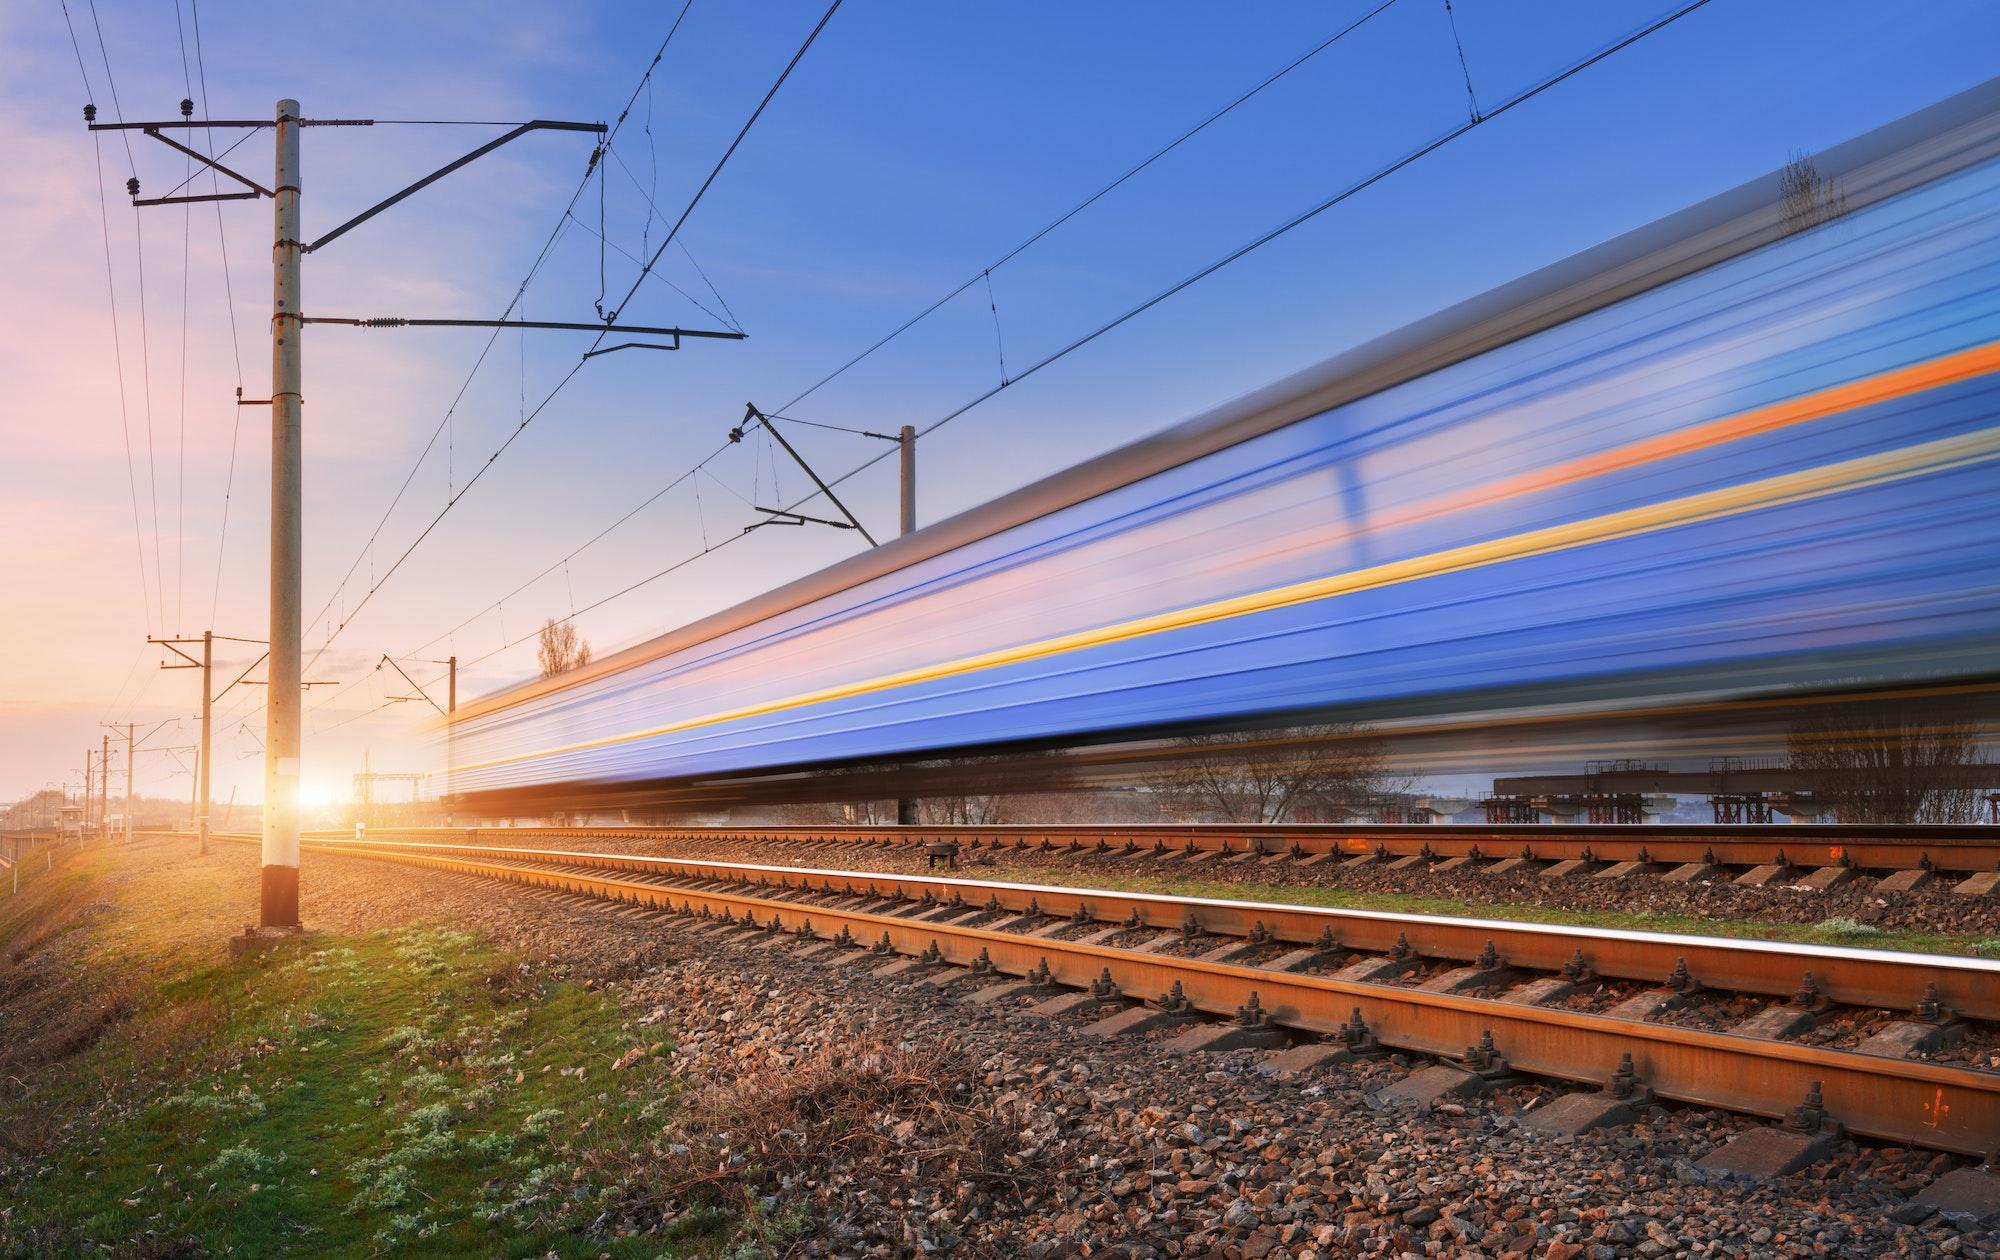 High speed passenger train in motion on railroad